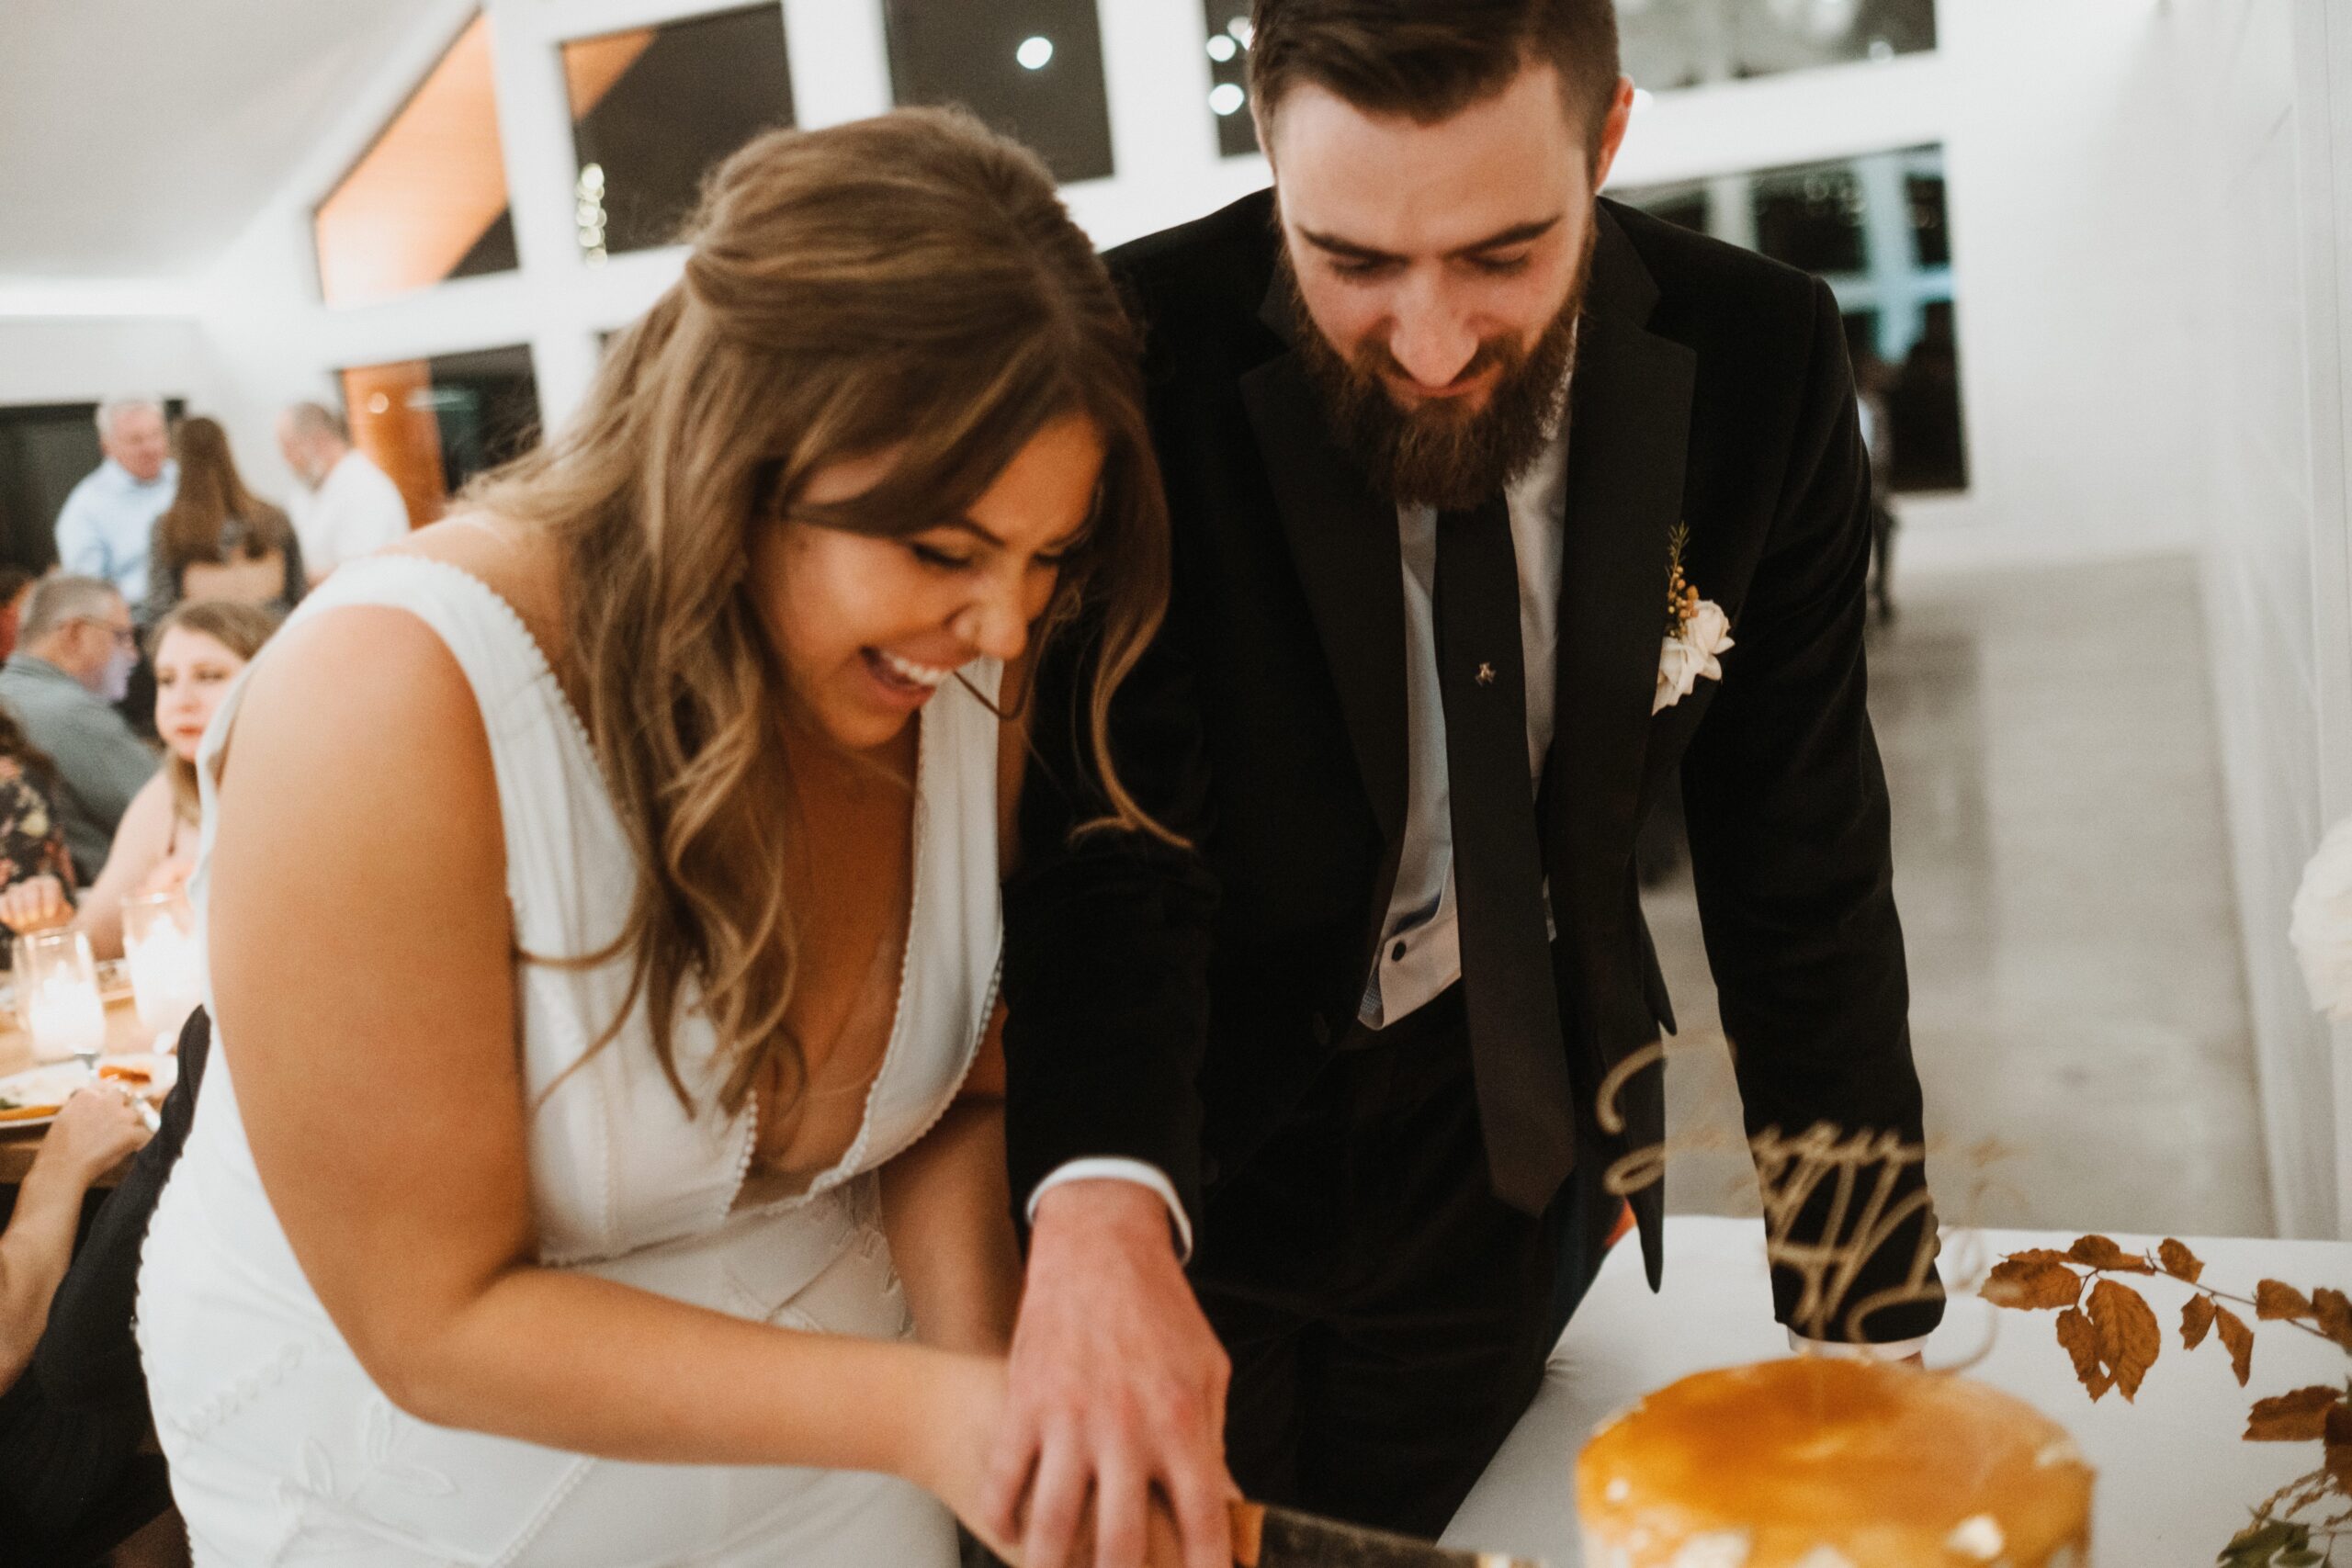 A bride and groom cut a cake together against a white venue interior. Photographed at a La Pointe Events Wedding